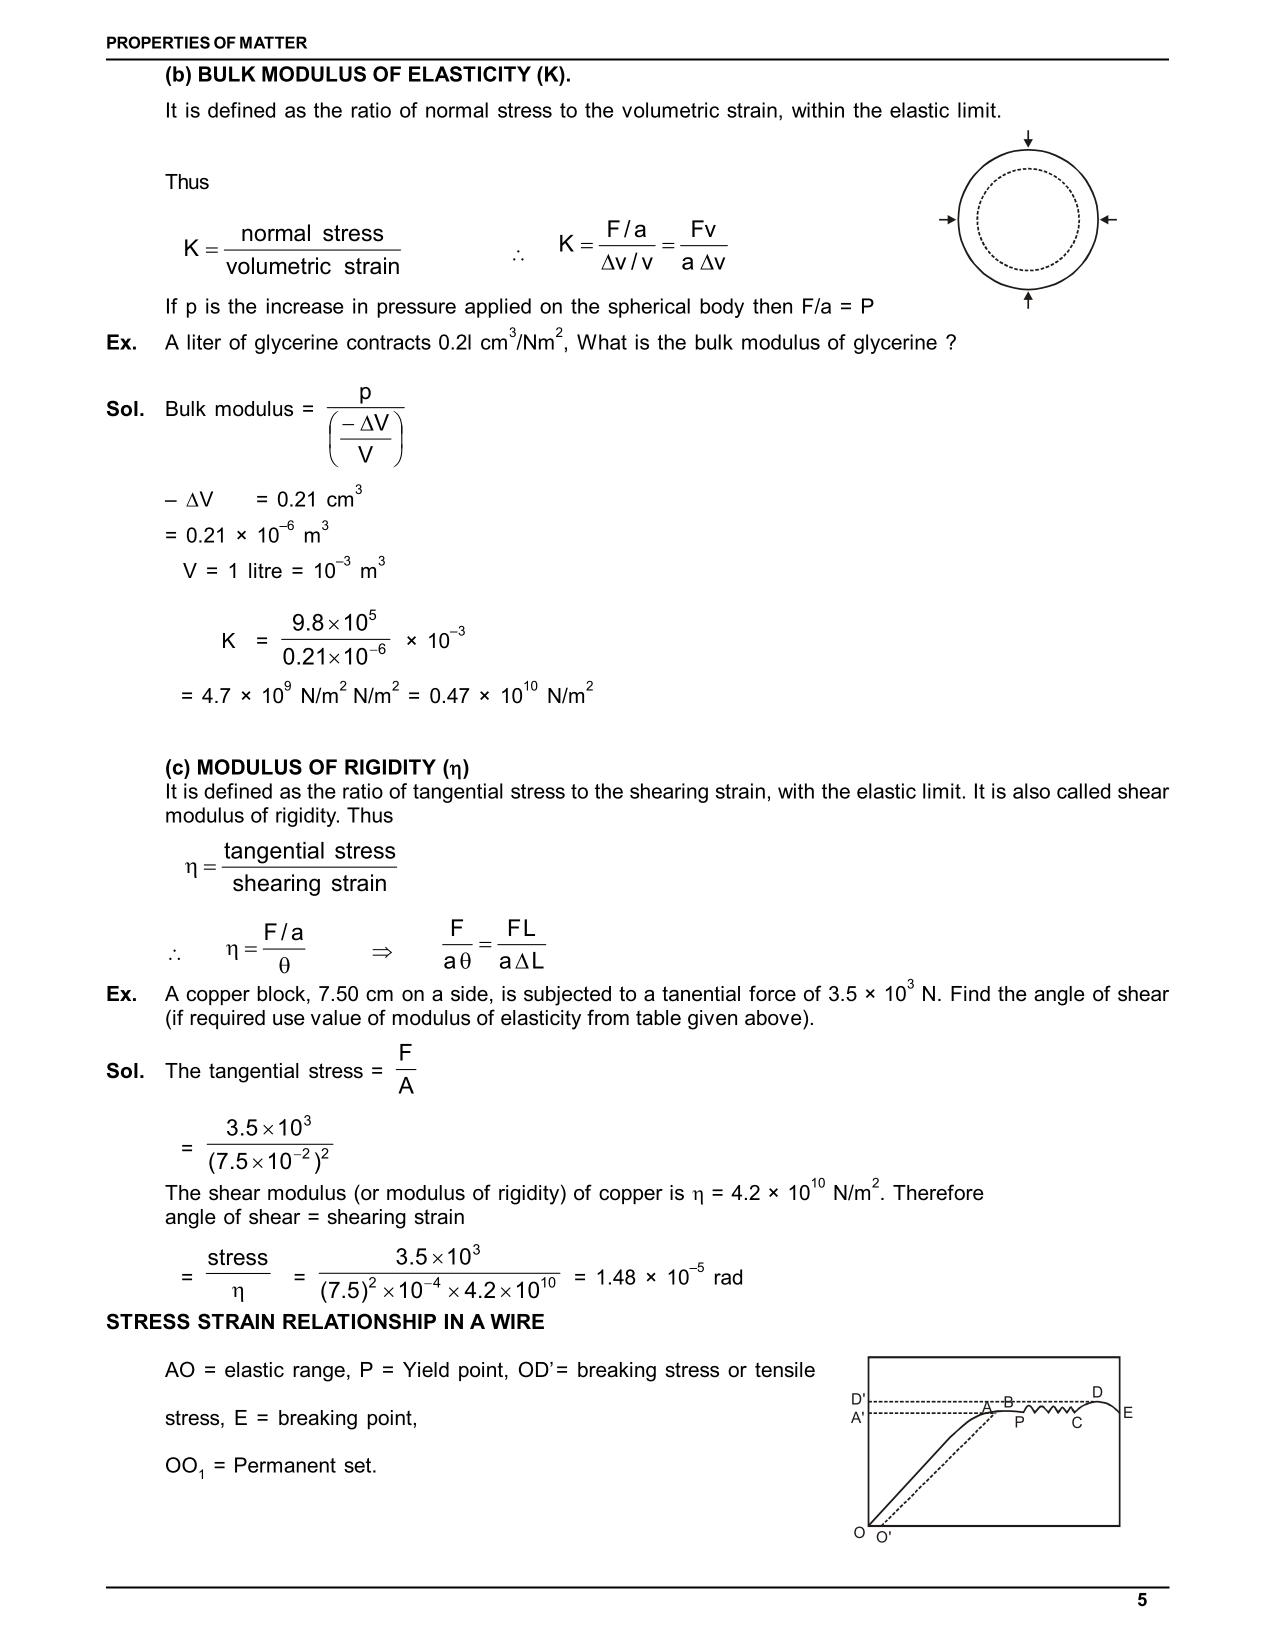 Mechanical Properties of Solids Class 11 Notes: Modulus of Elasticity 